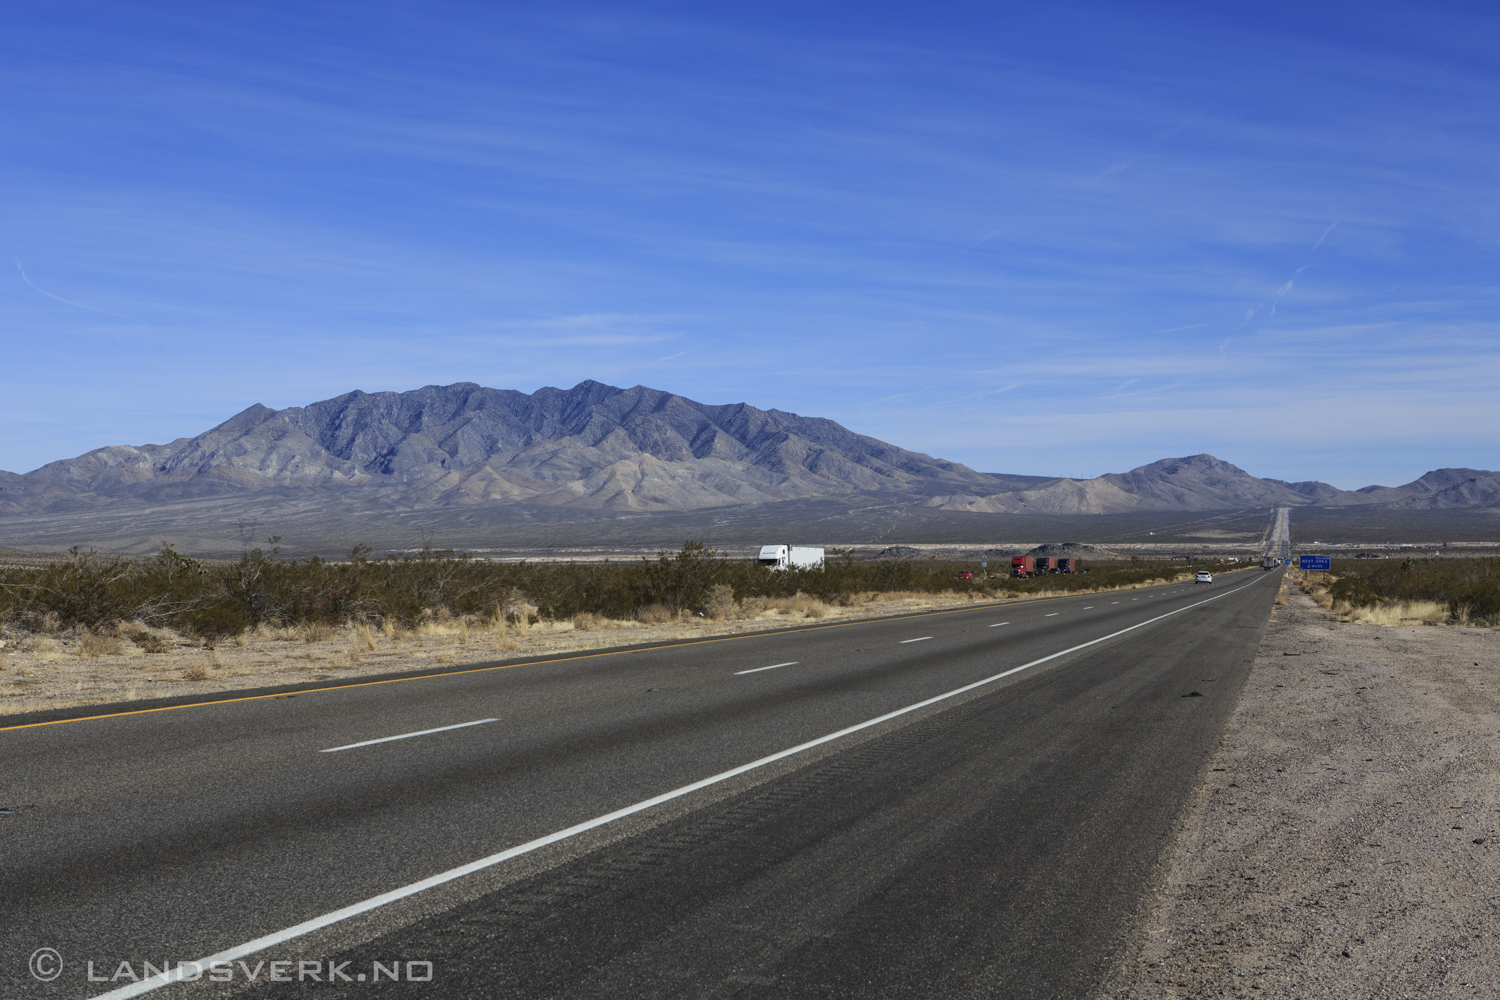 Somewhere between the Mojave Desert and Death Valley, California. 

(Canon EOS 5D Mark III / Canon EF 24-70mm f/2.8 L USM)